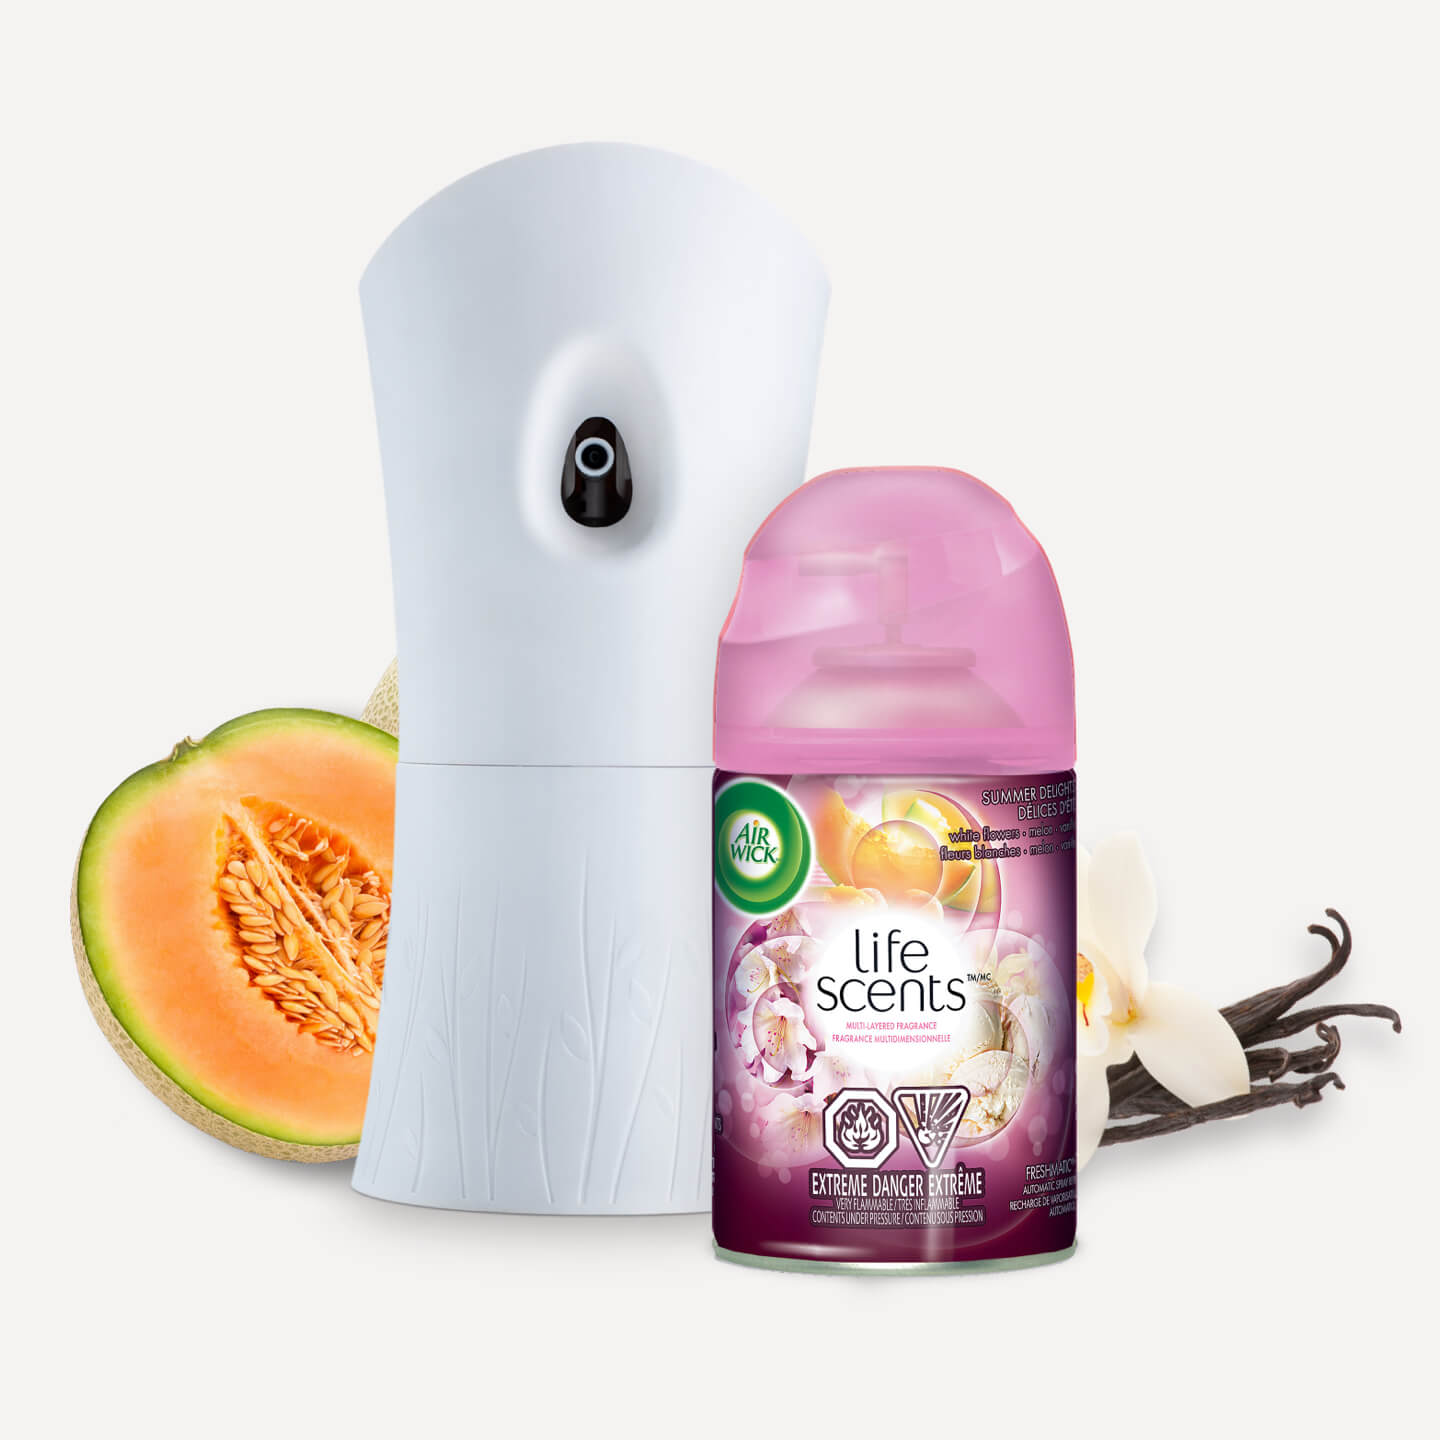 Air Wick Freshmatic Life Scents - Life Scents Automatic Air